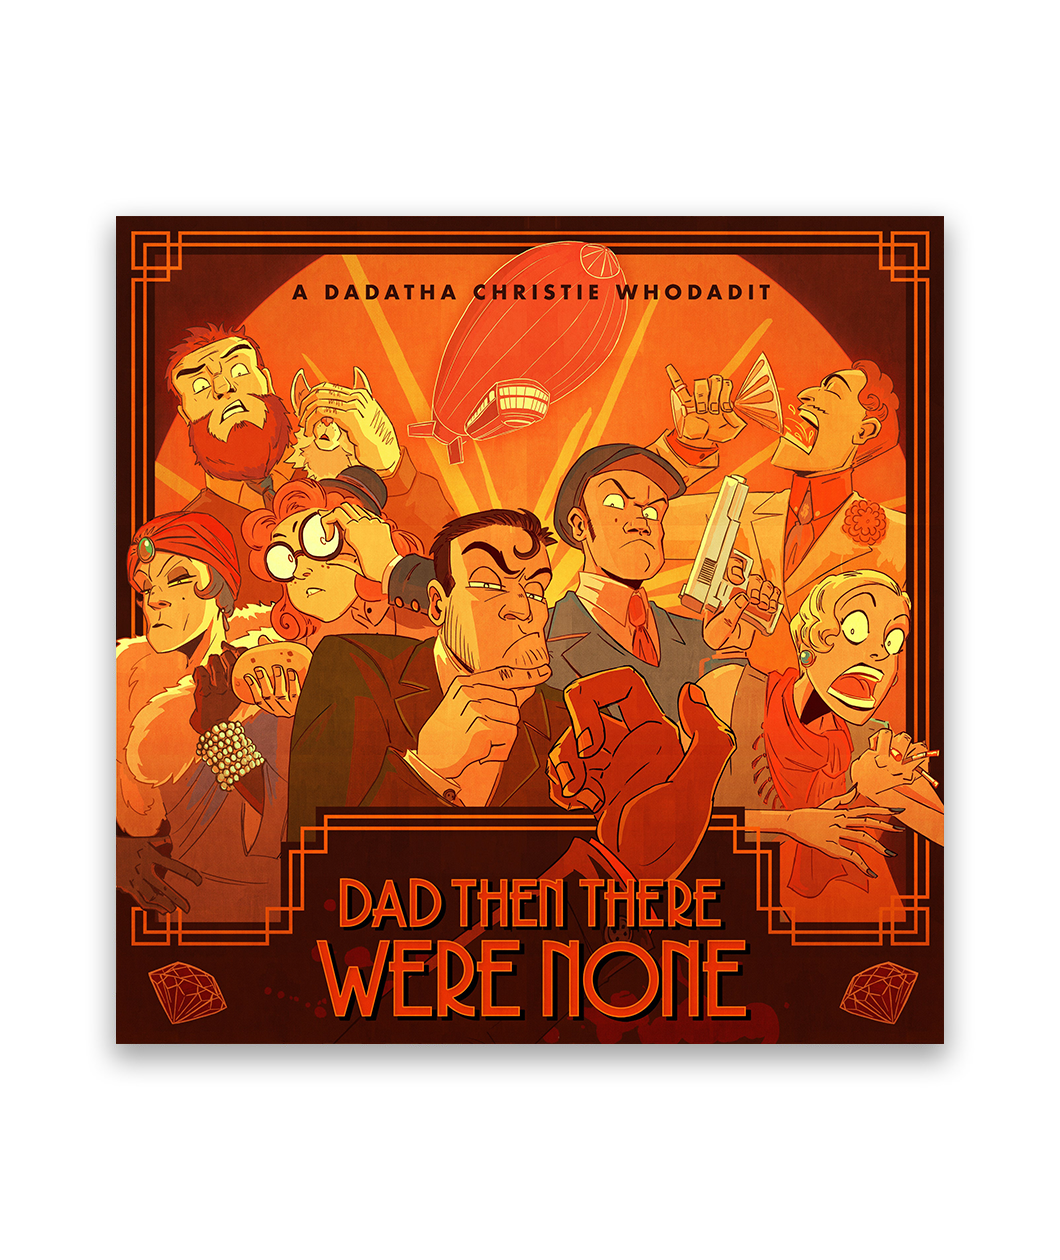 Art deco style border on orange image. Right to left: A woman is shocked, a man behind her downs a martini, a man wields a gun, front & center a man ponders his thoughts, behind him a woman adjusts her glasses with one hand & holds a potato in the other, a fortune teller next to her looks annoyed, & a bearded man covers a llamas eyes behind them. A blimp looms in the center background & a twisted hand sits in the foreground above the title. A diamond sits in each bottom corner of the illustration.